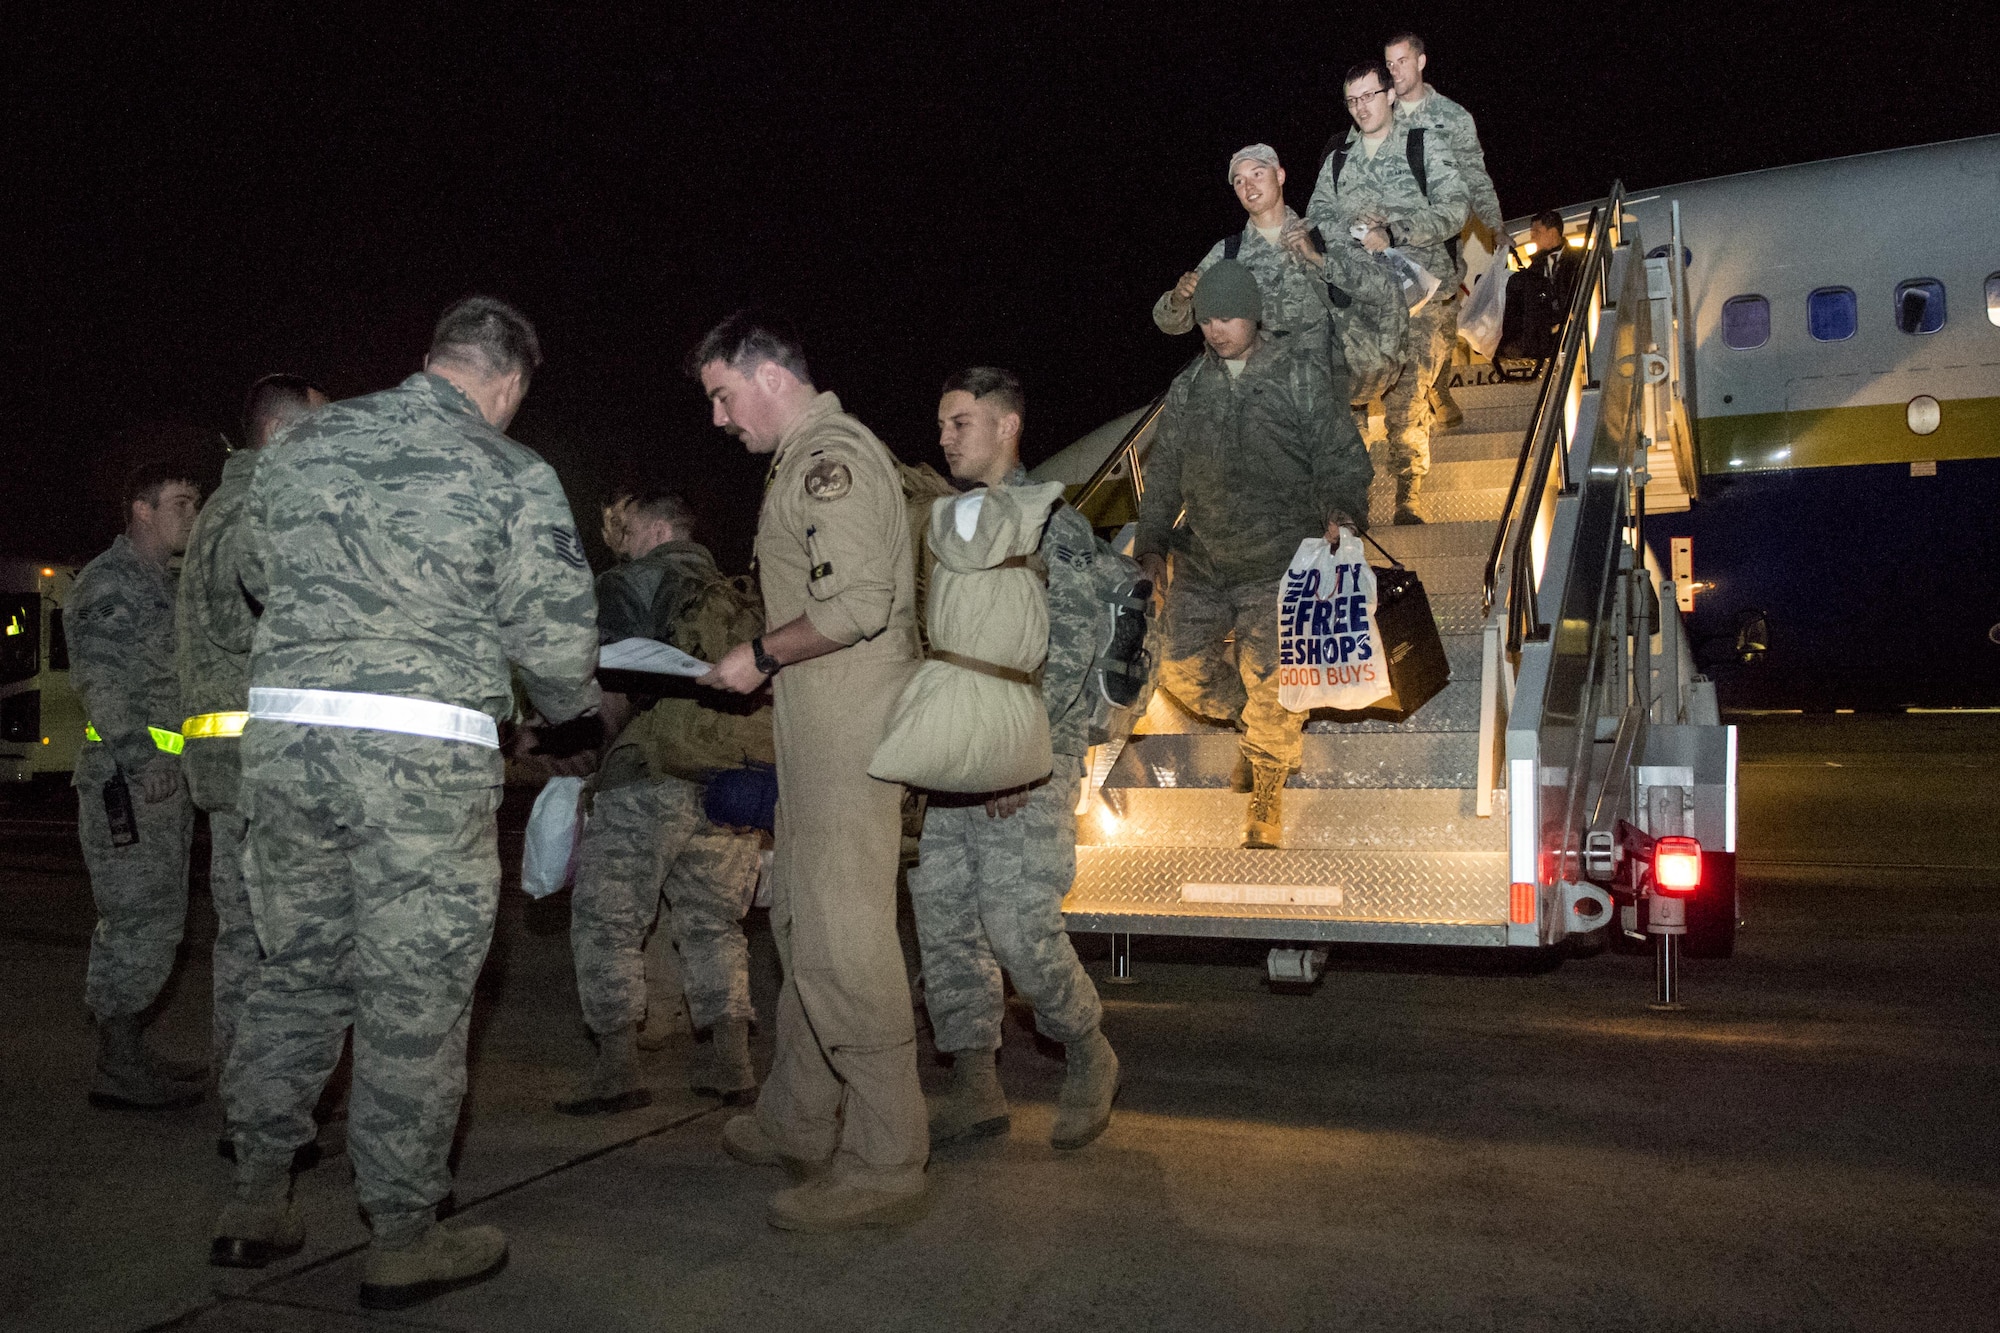 Airmen from the 4th Maintenance Group and 335th Fighter Squadron return from a deployment to an undisclosed location in Southwest Asia, Nov. 23, 2016, at Seymour Johnson Air Force Base, North Carolina. More than 80 members returned just in time for the holidays with the bulk of the deployers having returned a month prior. (U.S. Air Force photo by Airman Shawna L. Keyes)